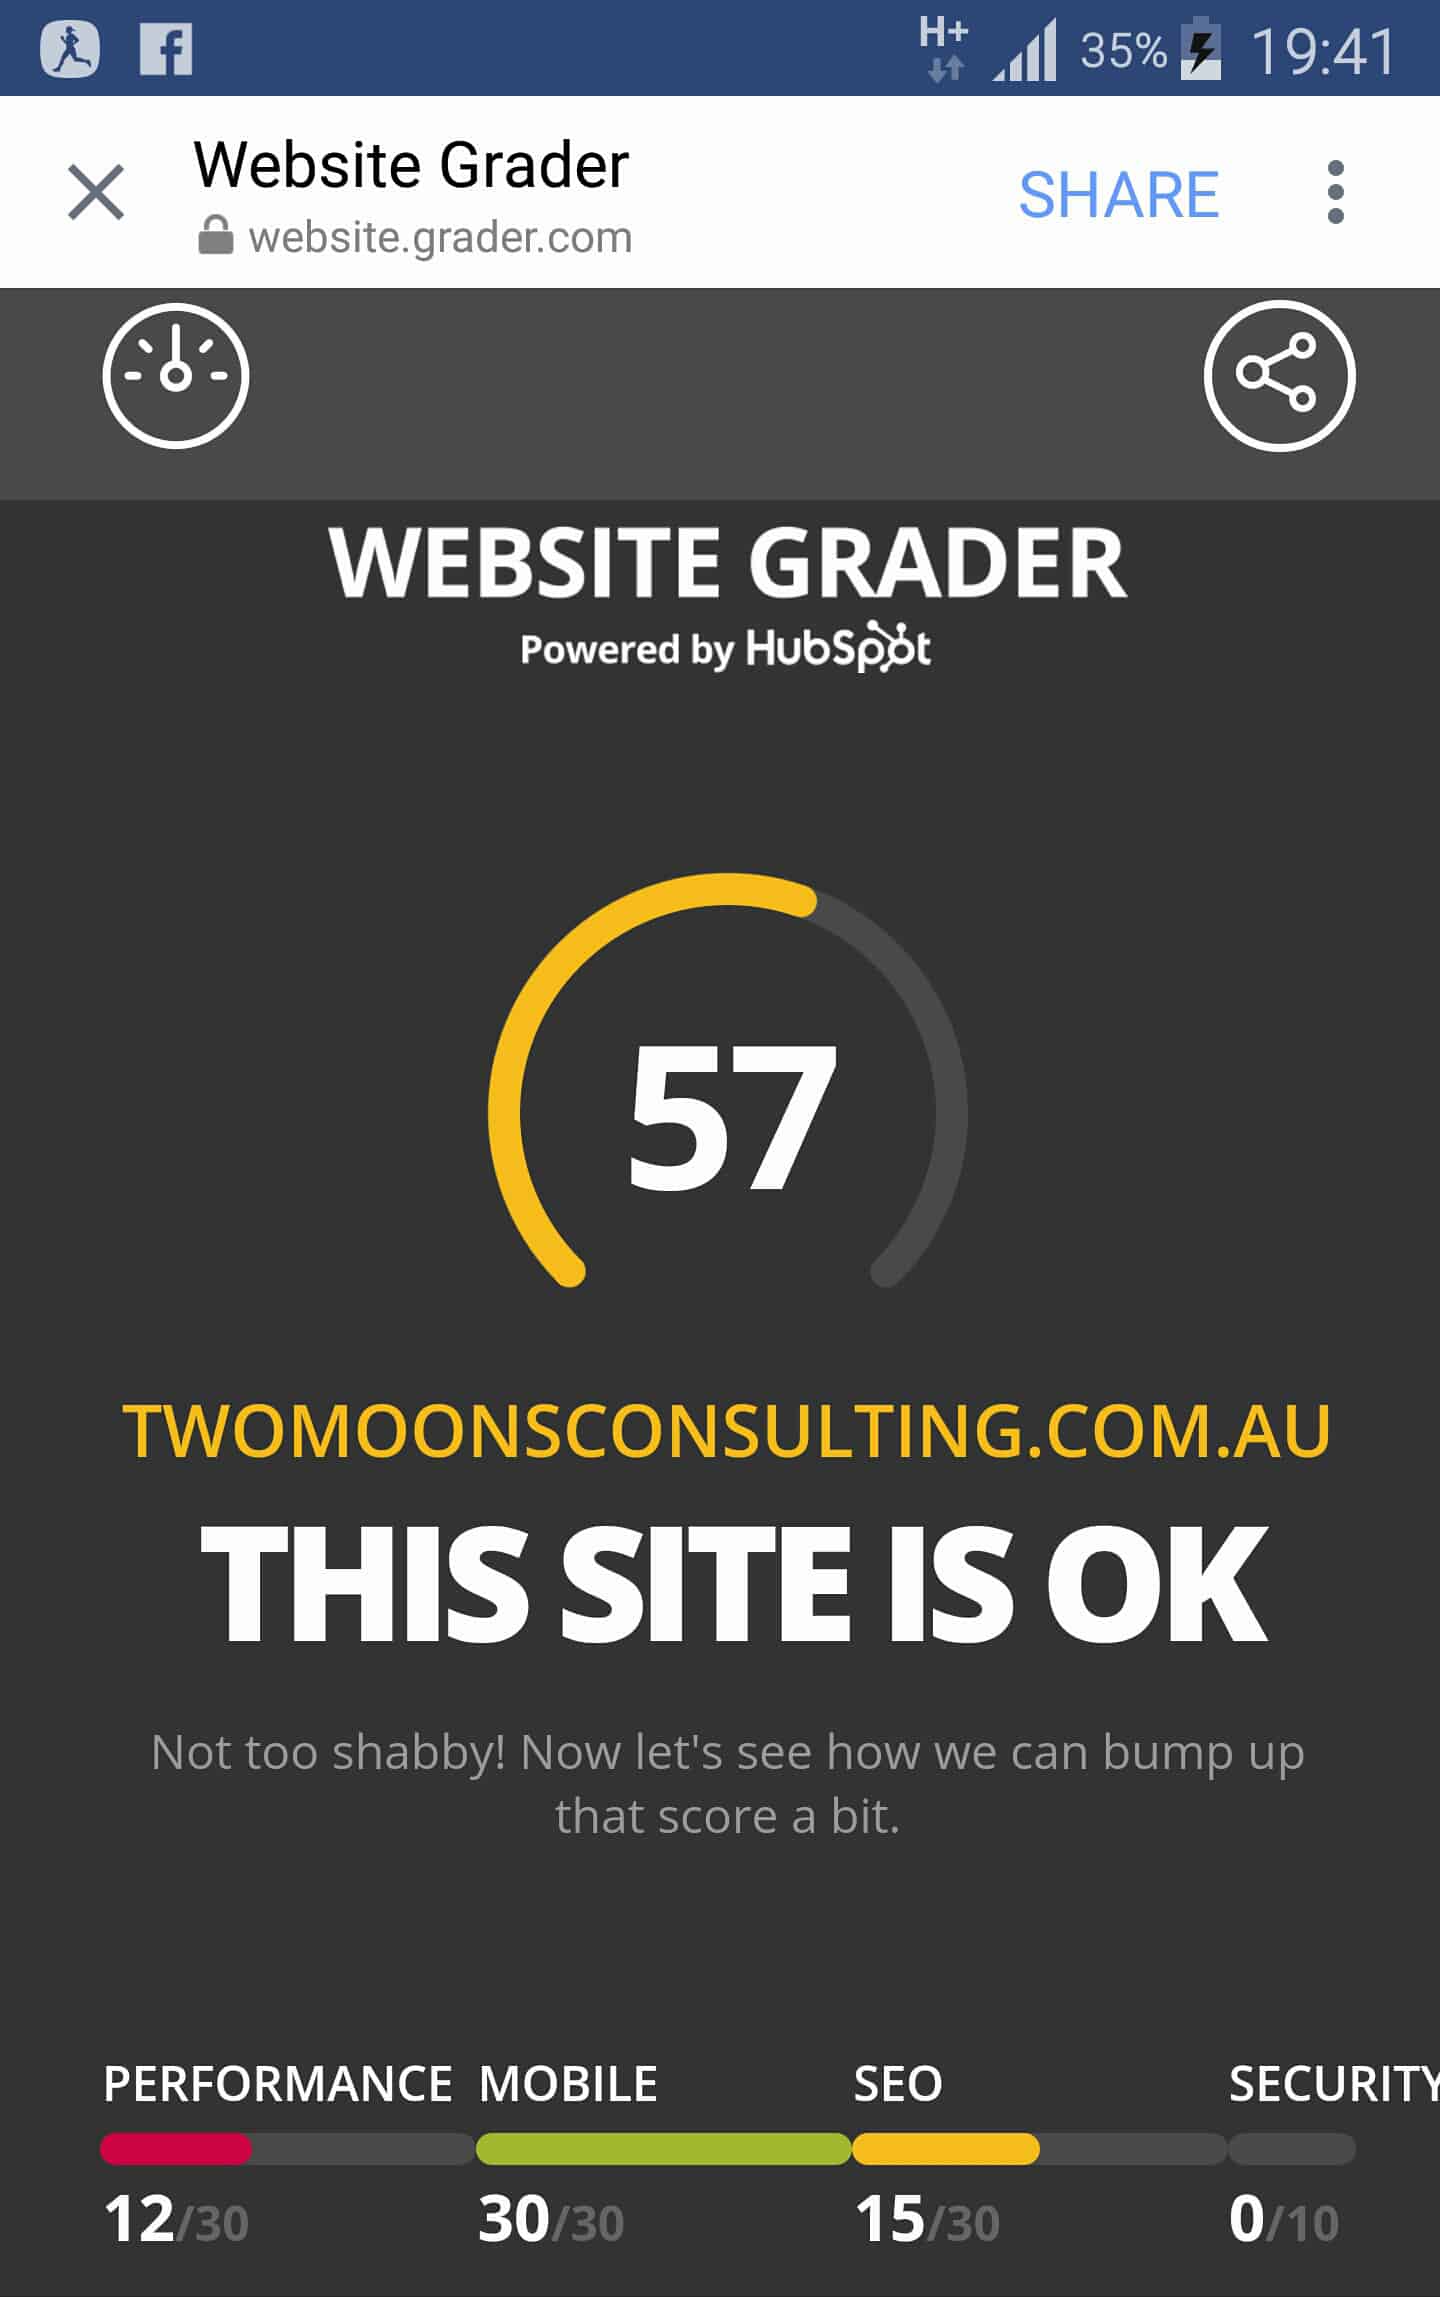 hubspot website grader clarence ling testing two moons consulting website